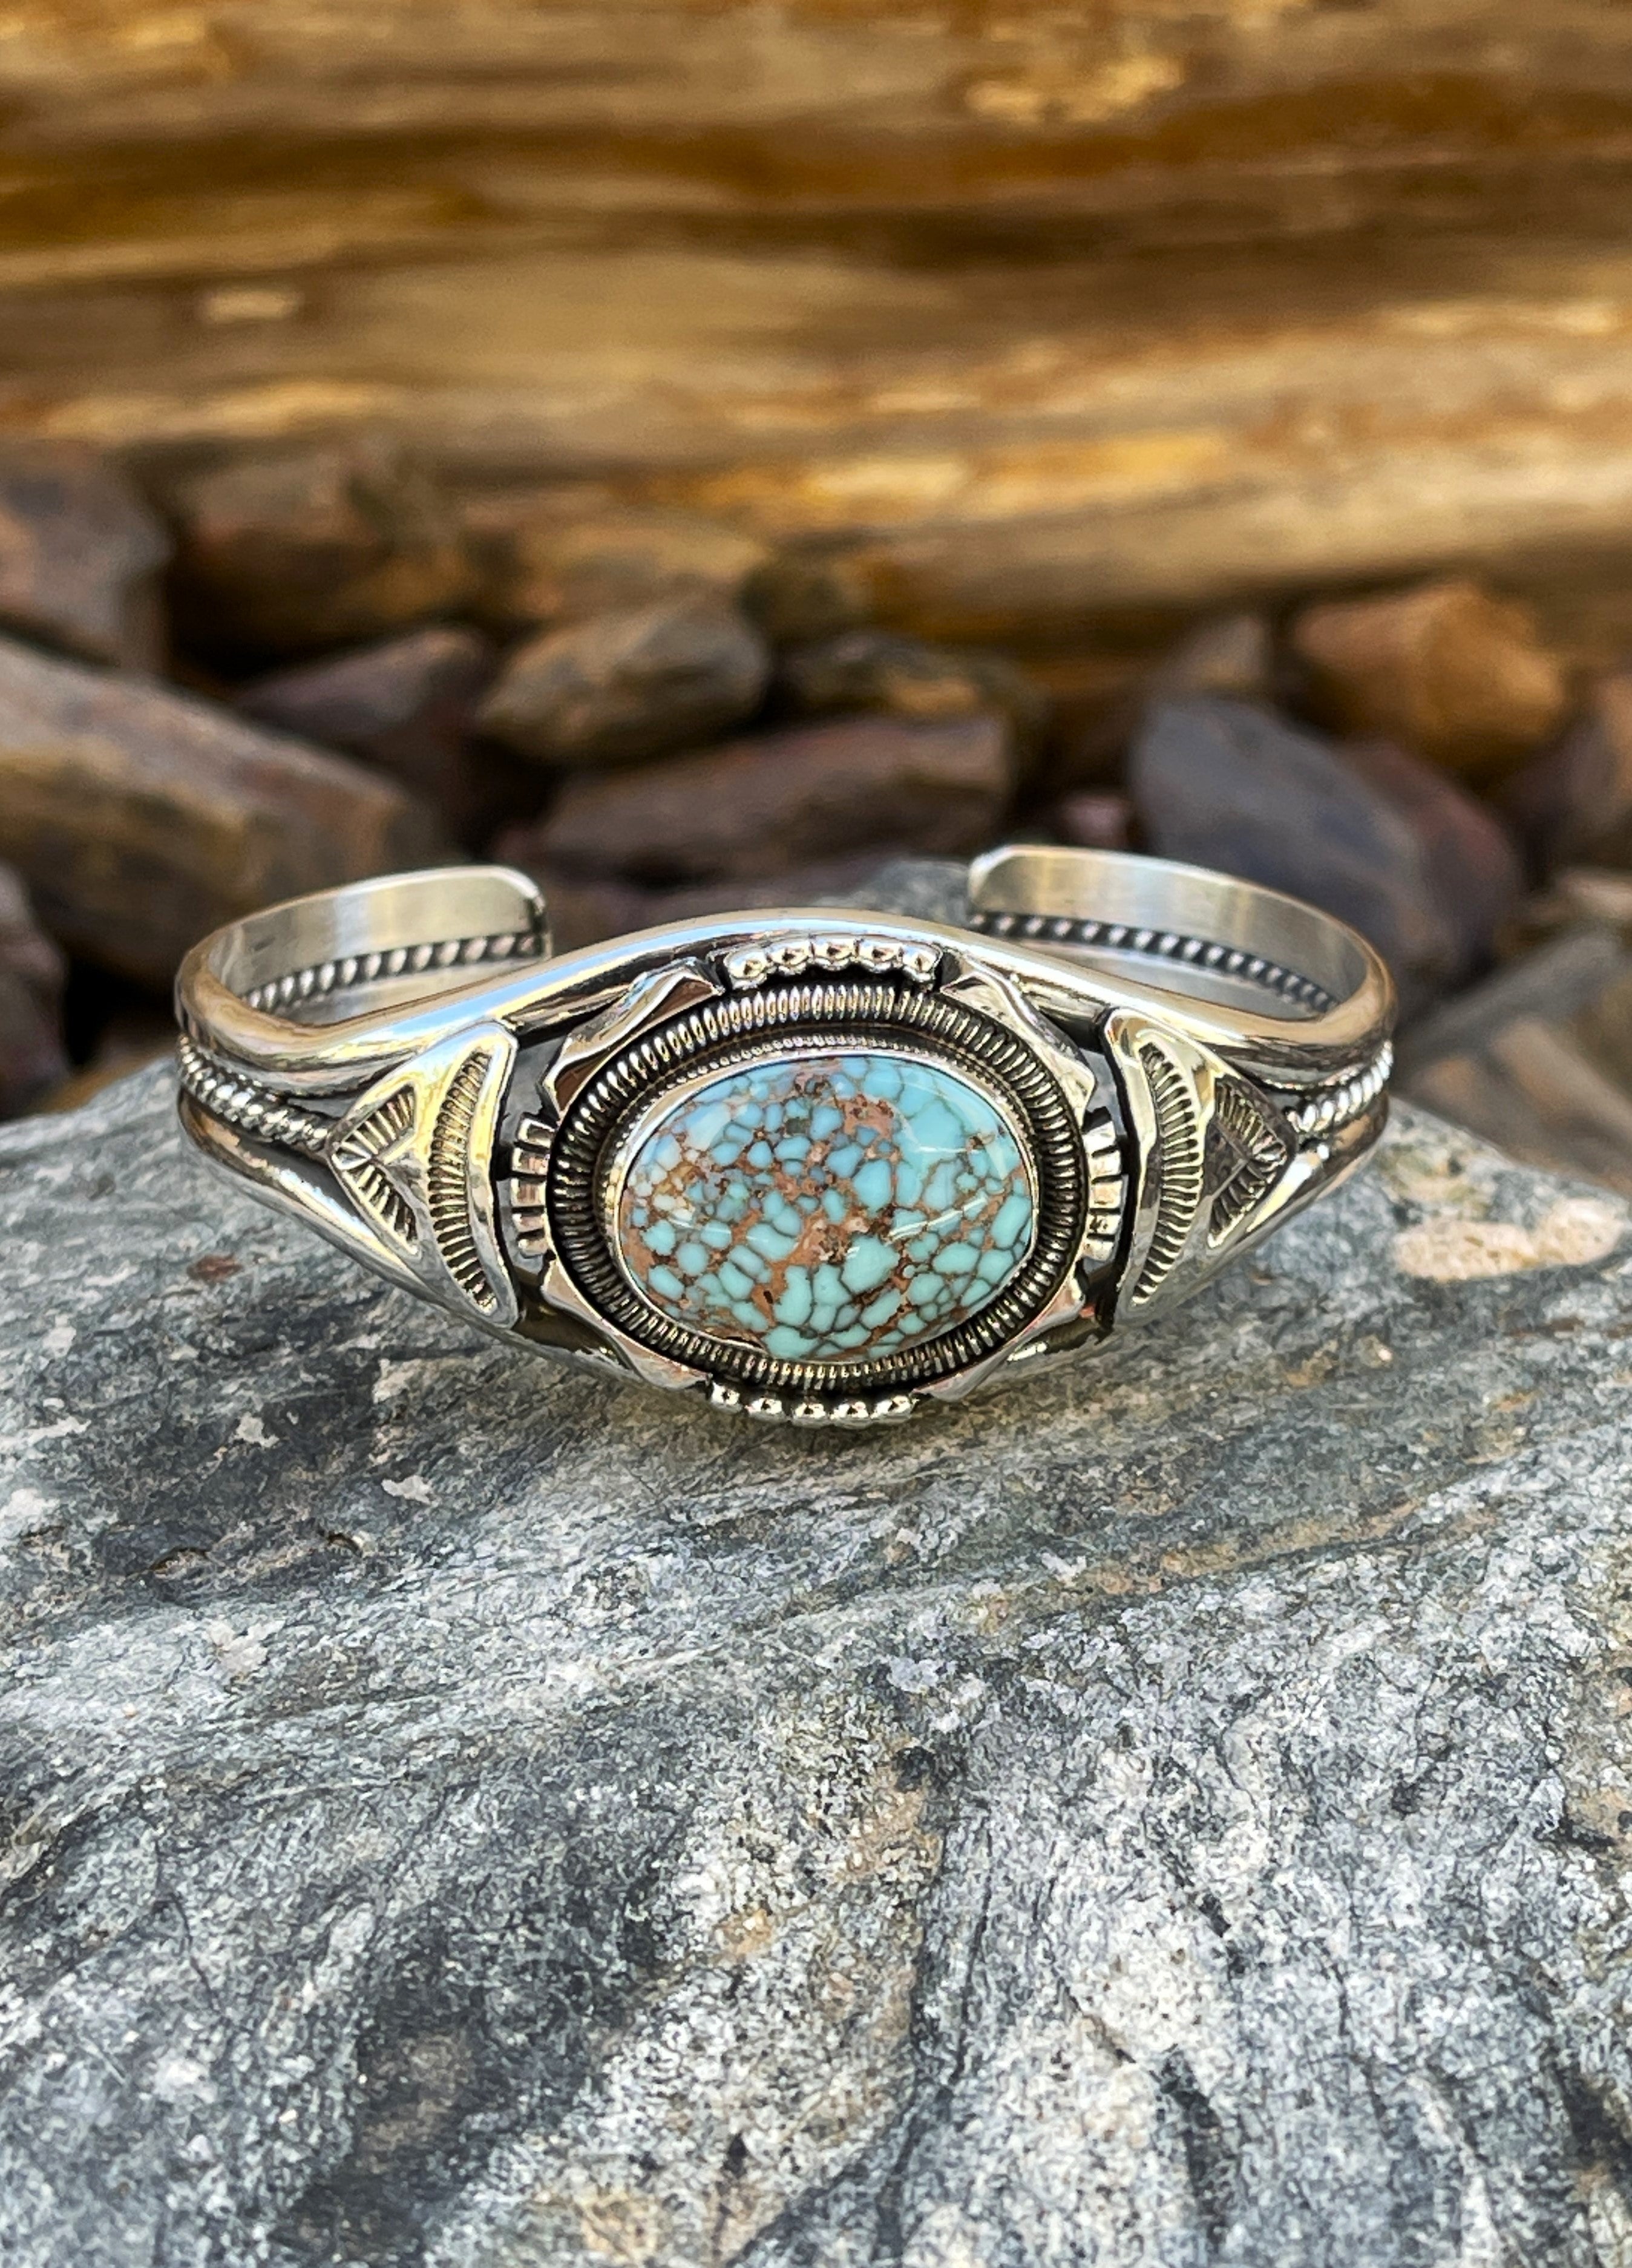 Handmade Solid Sterling Silver Dry Creek Turquoise Bracelet with Coil and Bead Accent